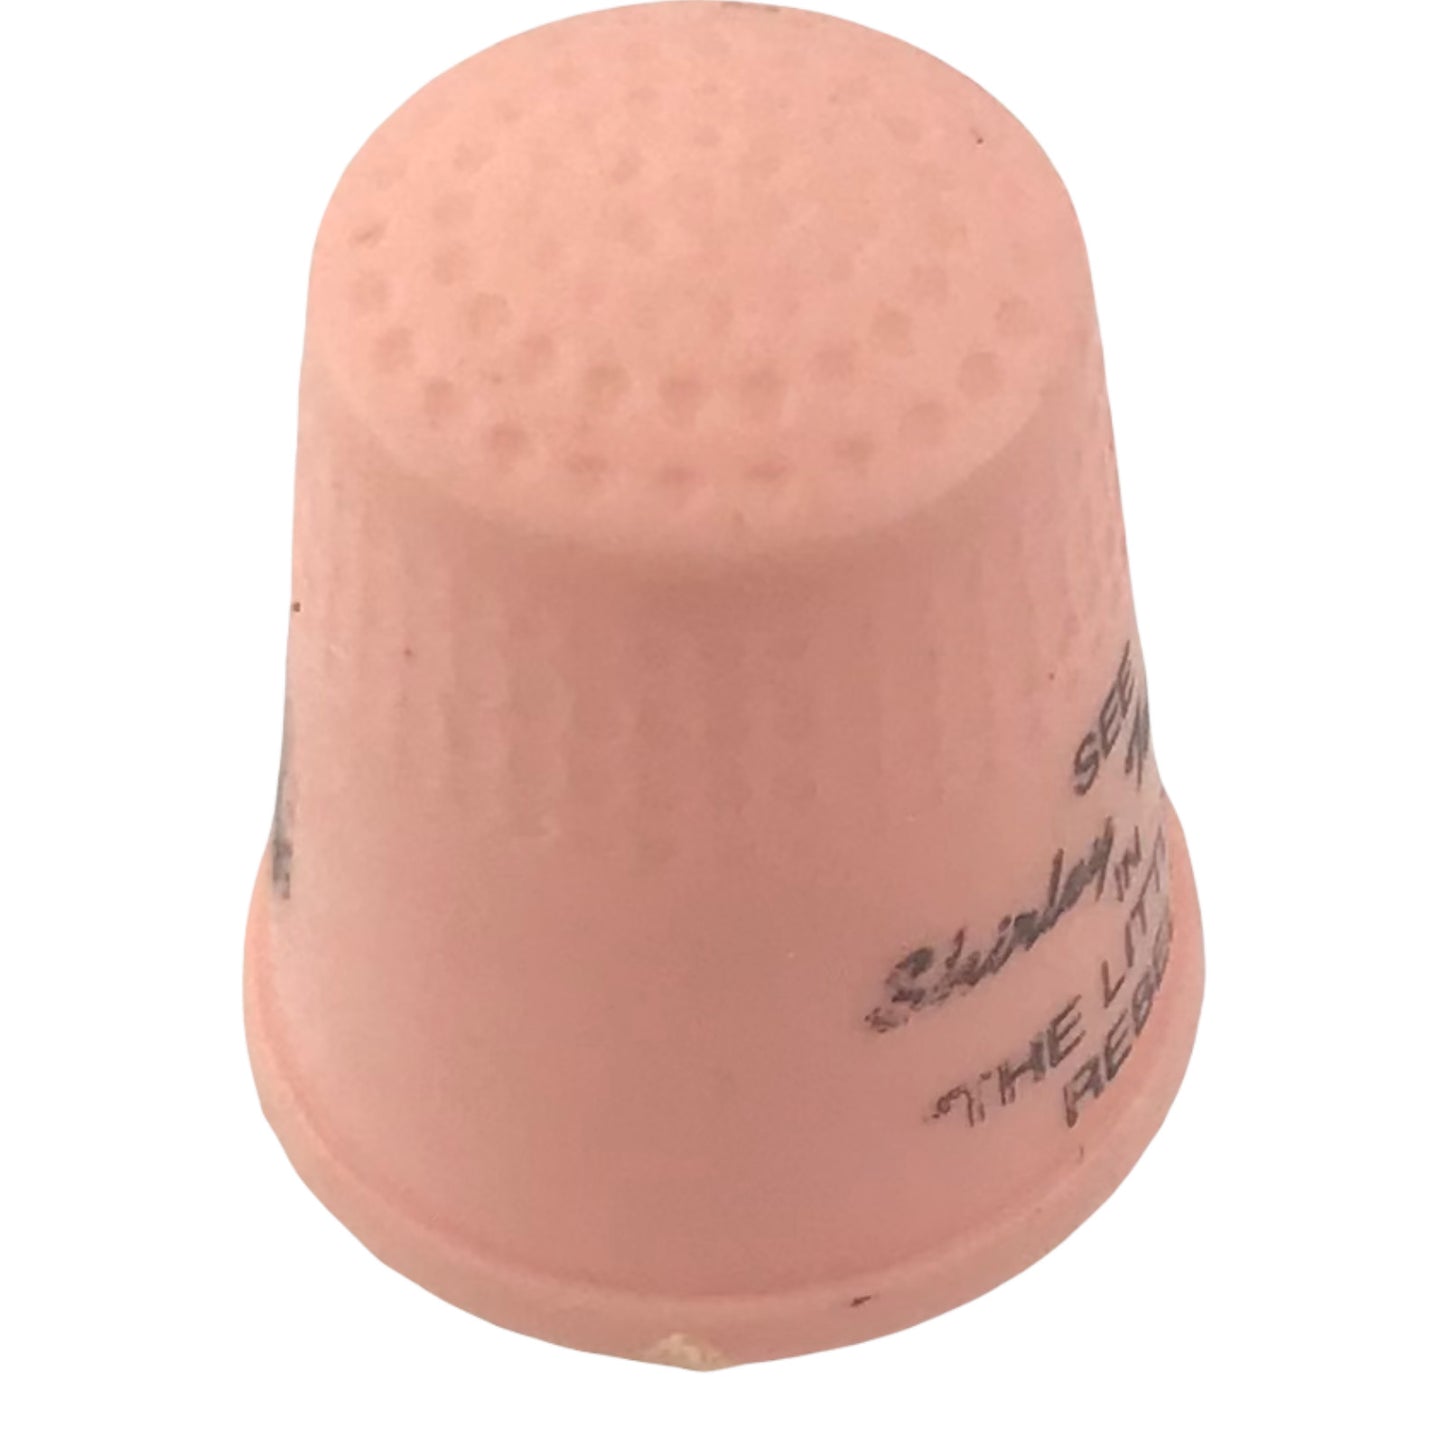 Shirley Temple "The Littlest Rebel" Vintage Pink Thimble